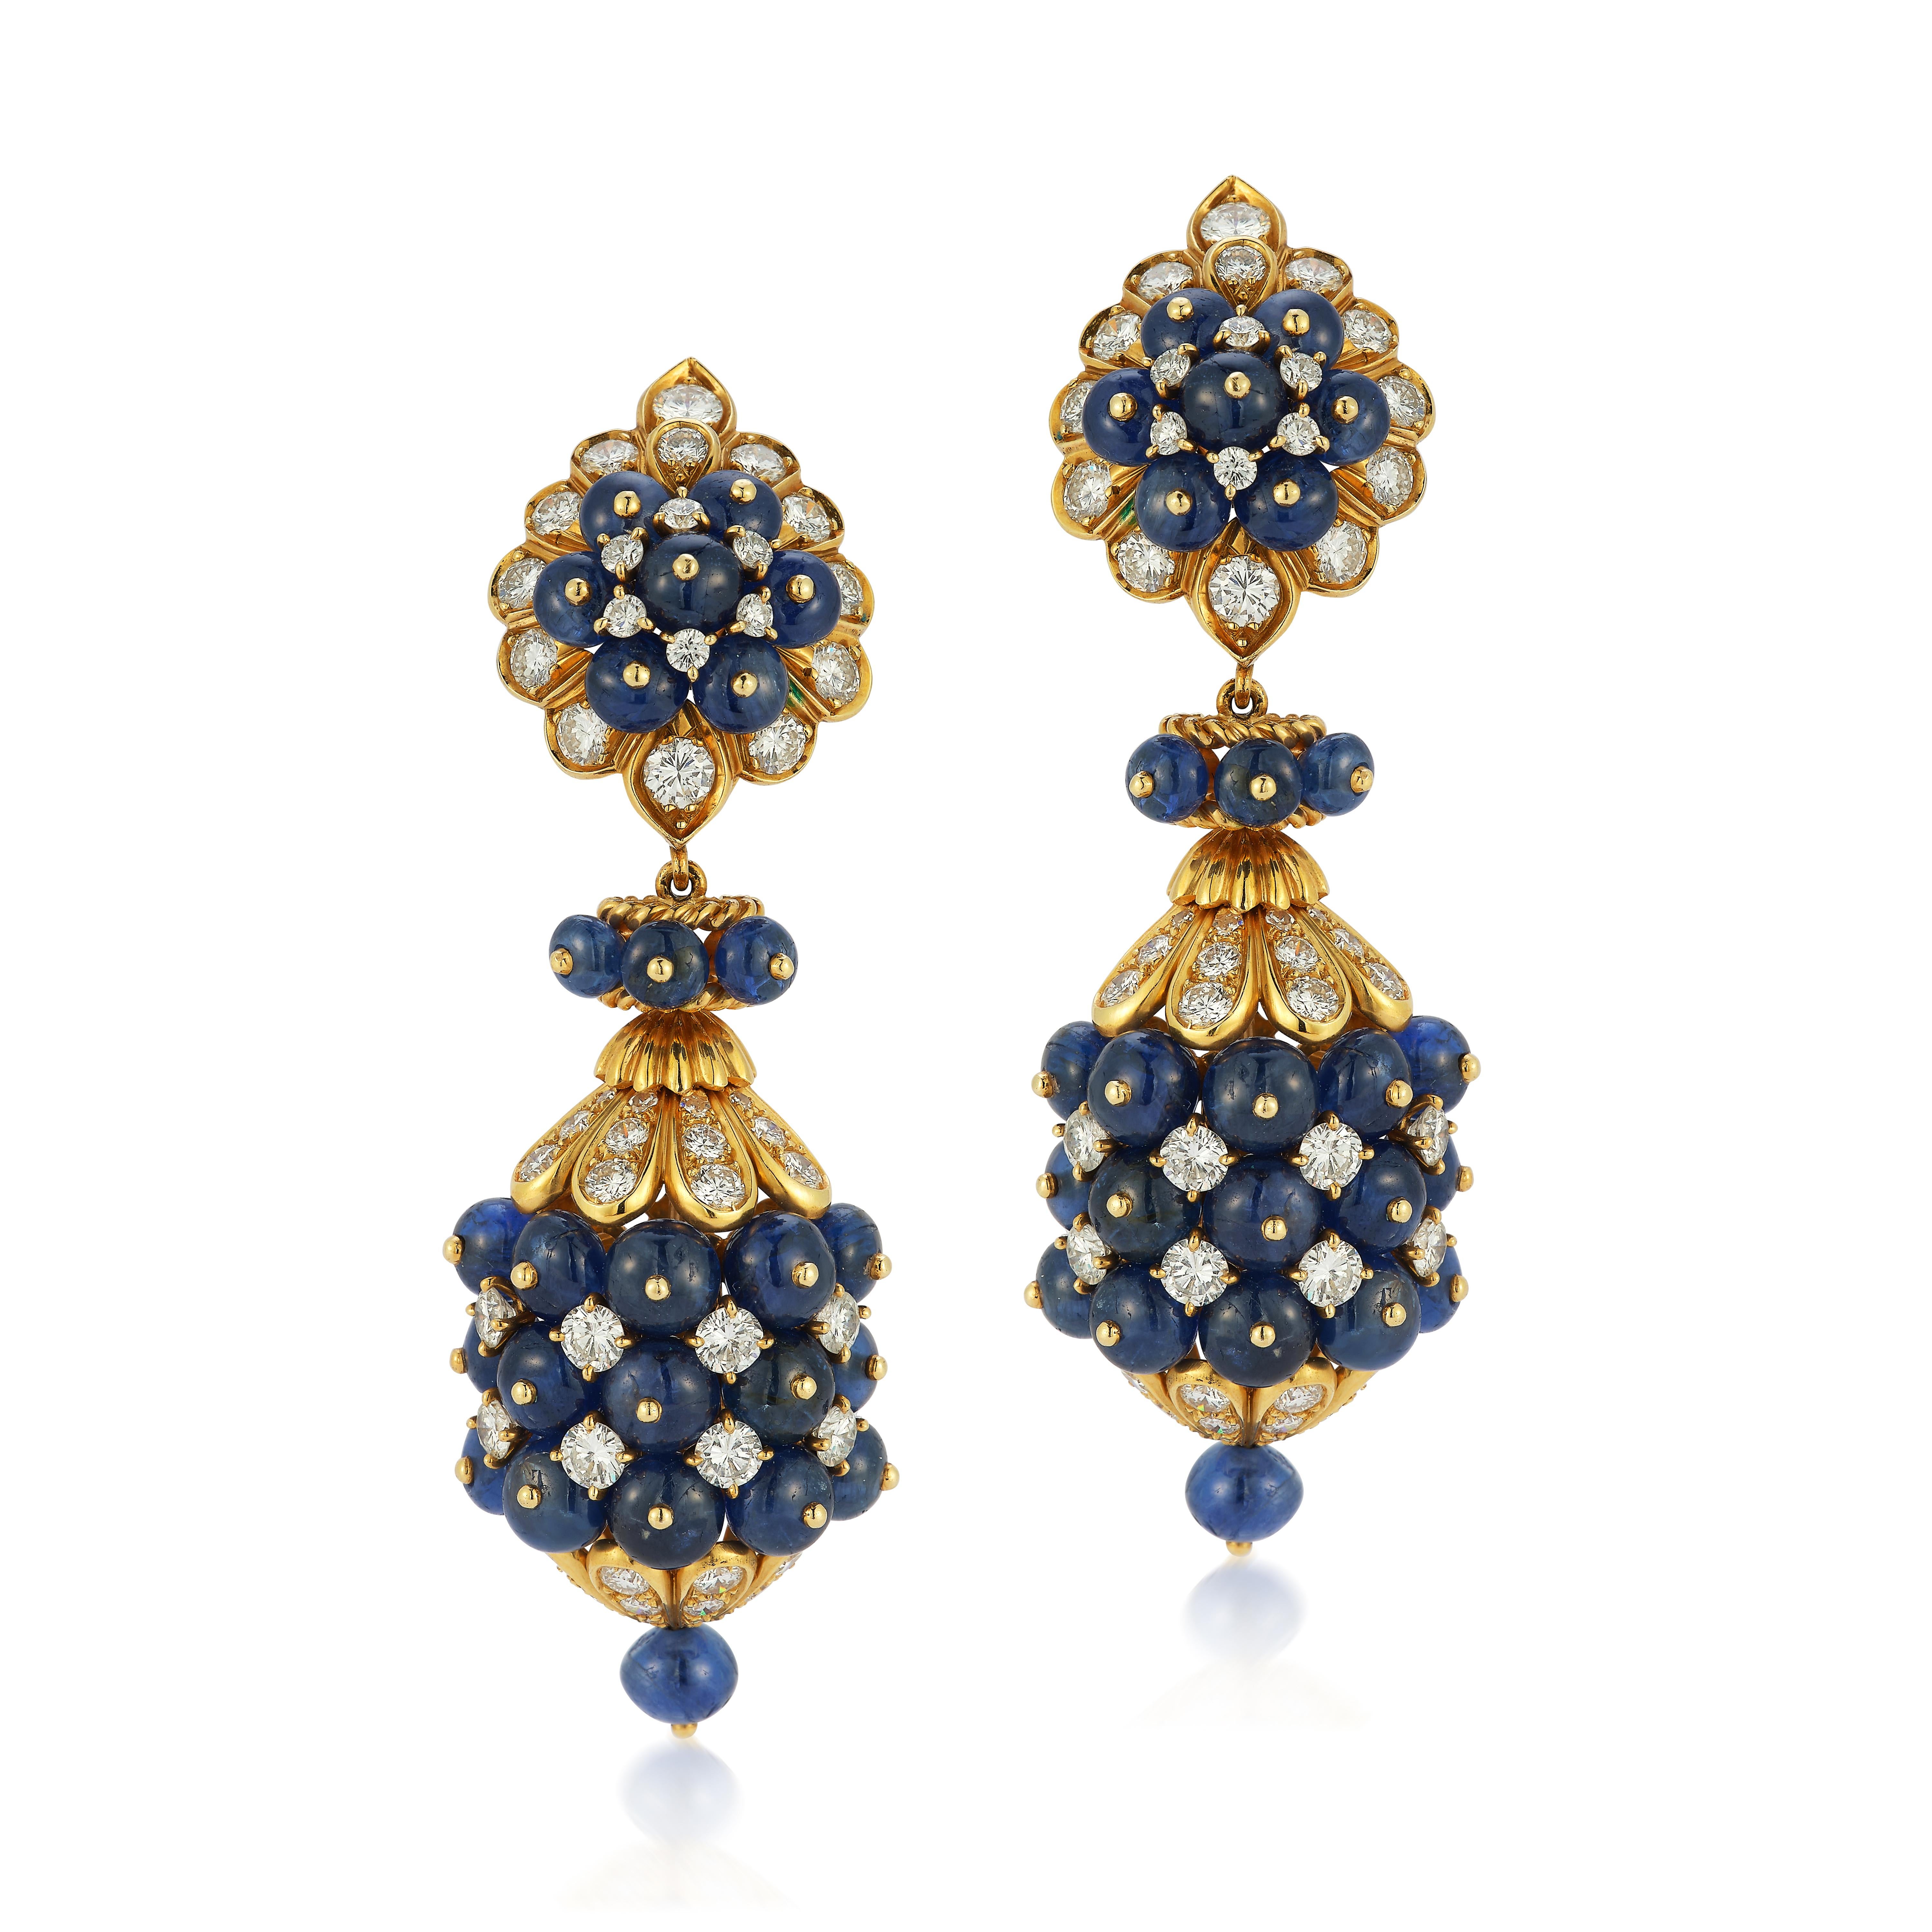 Van Cleef and Arpels Day and Night Sapphire Earrings - A pair of 18 karat gold earrings set with sapphire beads and approximately 6.1 carats of round and single cut diamonds. The pendants are detachable allowing the earrings to be worn two different